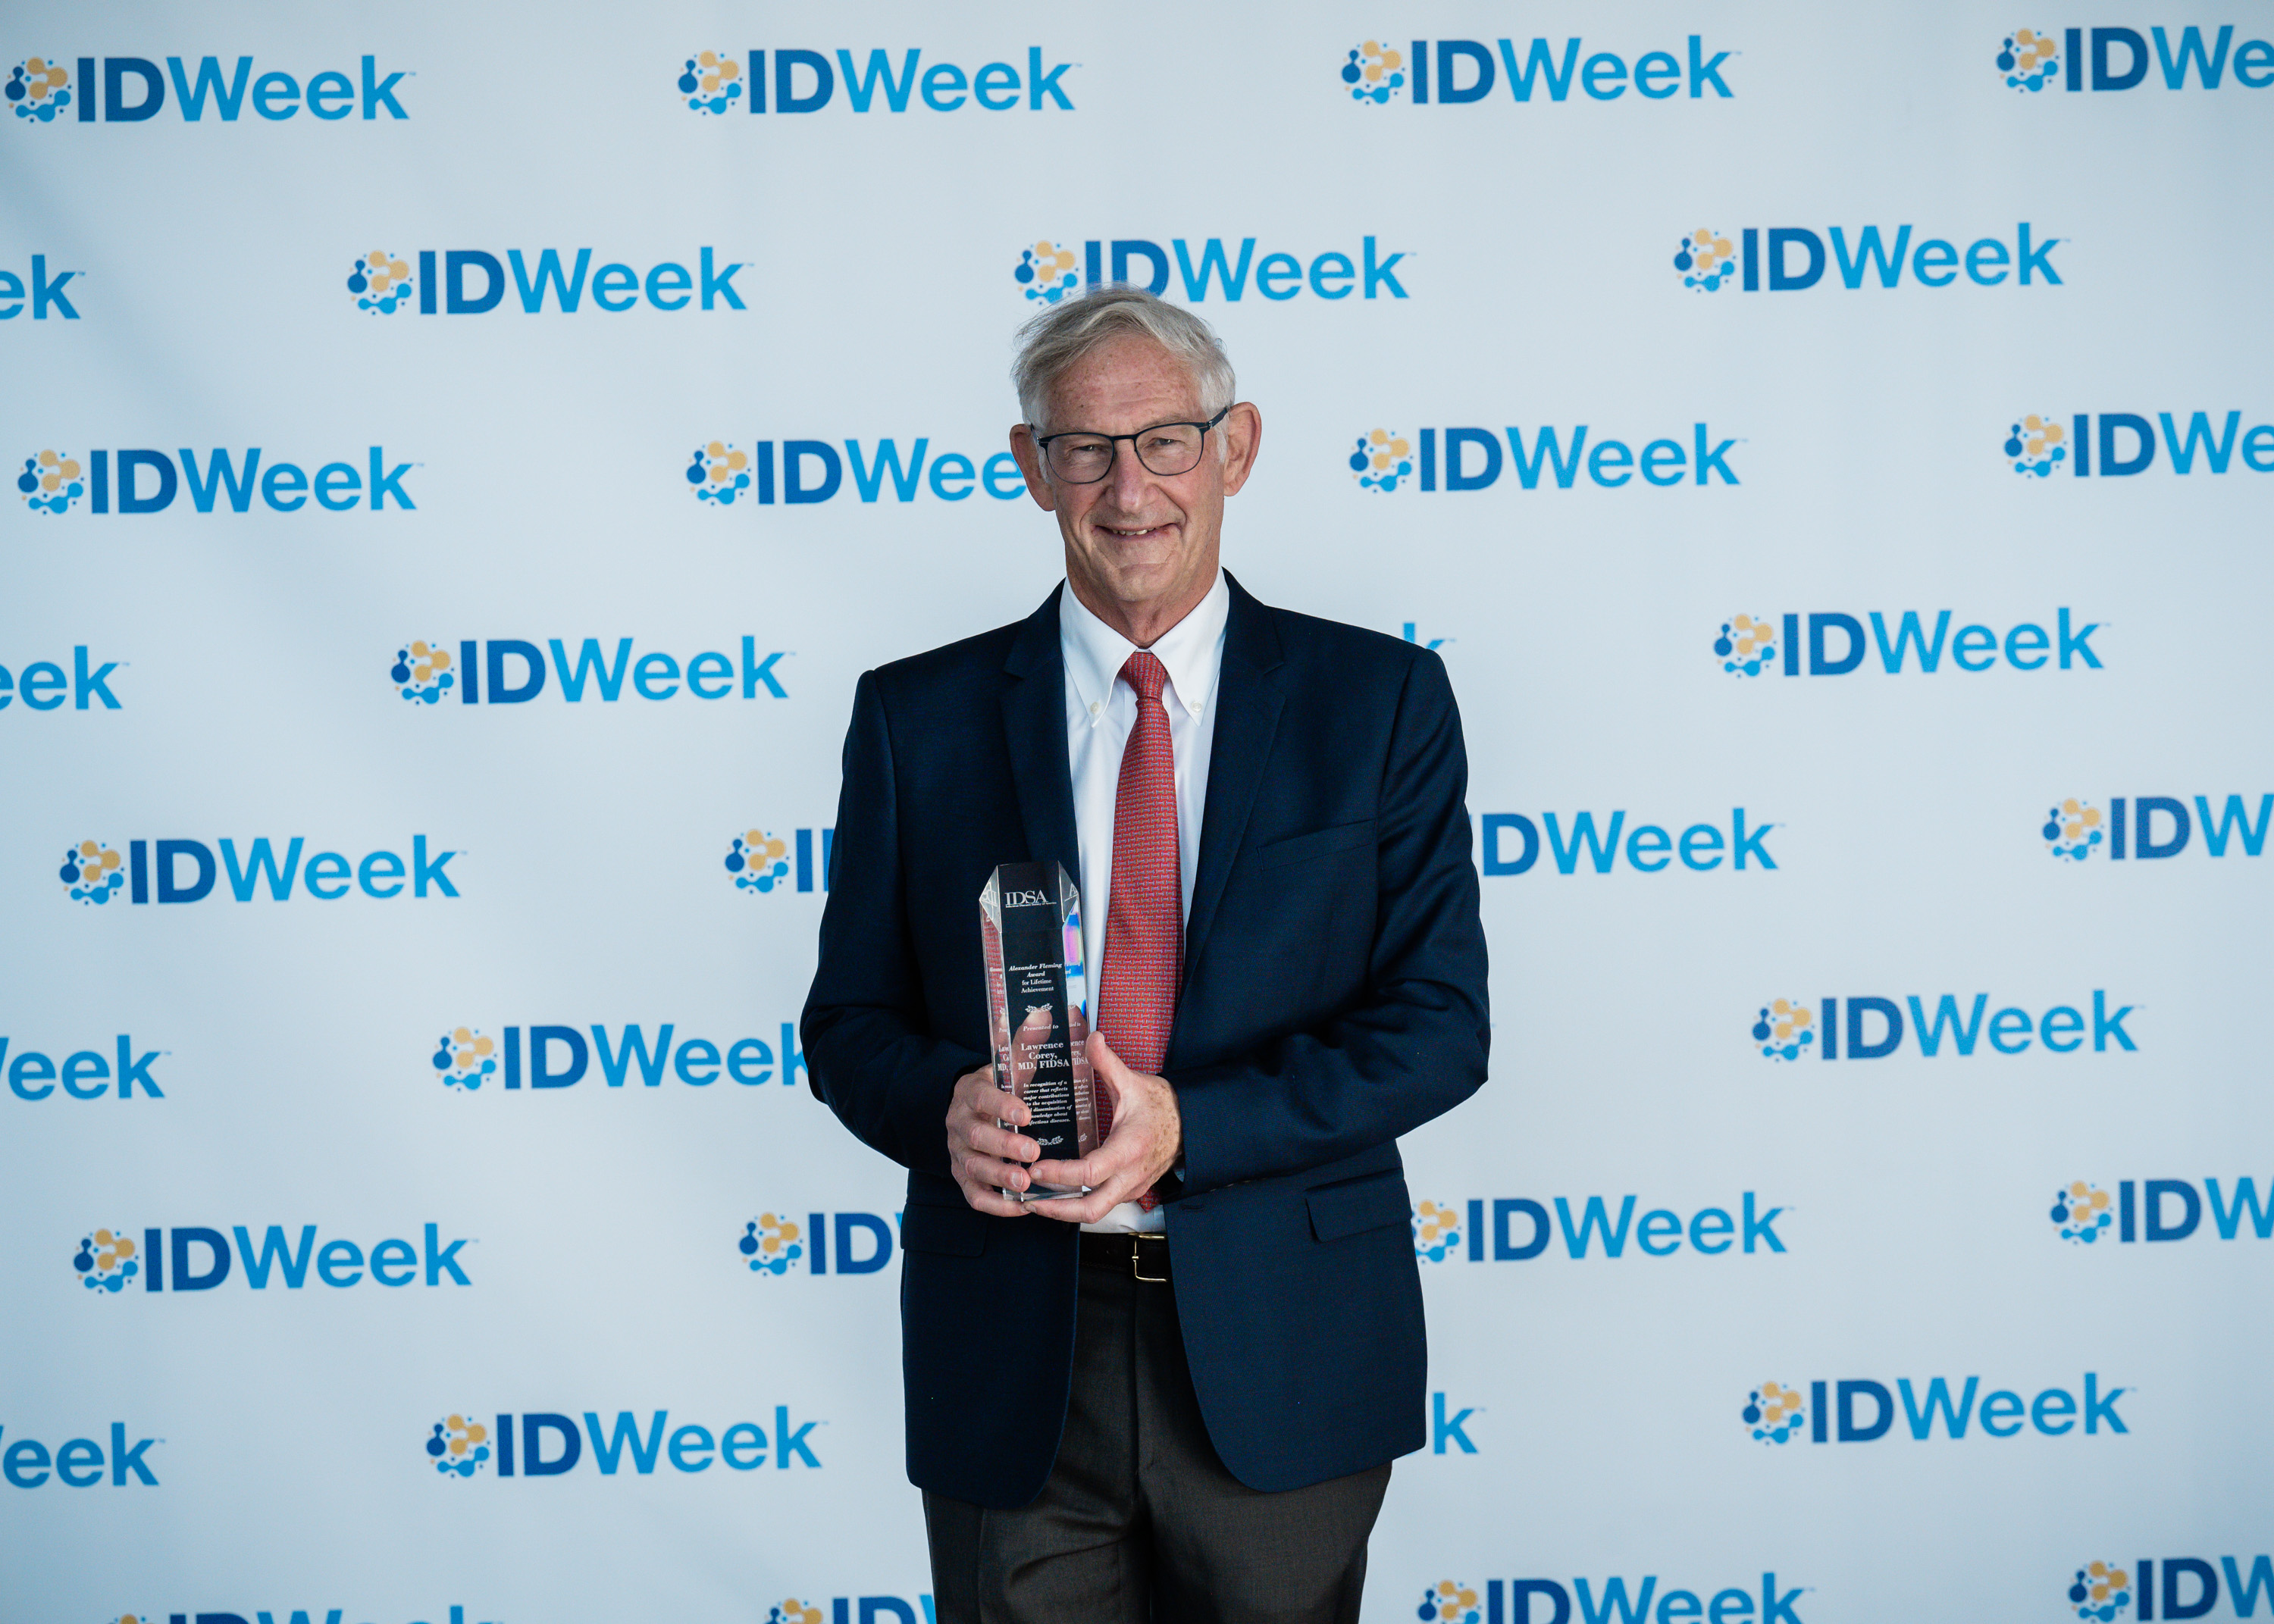 IDSA recognizes Lawrence Cory, MD, FIDSA, with the Alexander Fleming Award for Lifetime Achievement during IDWeek 2022.